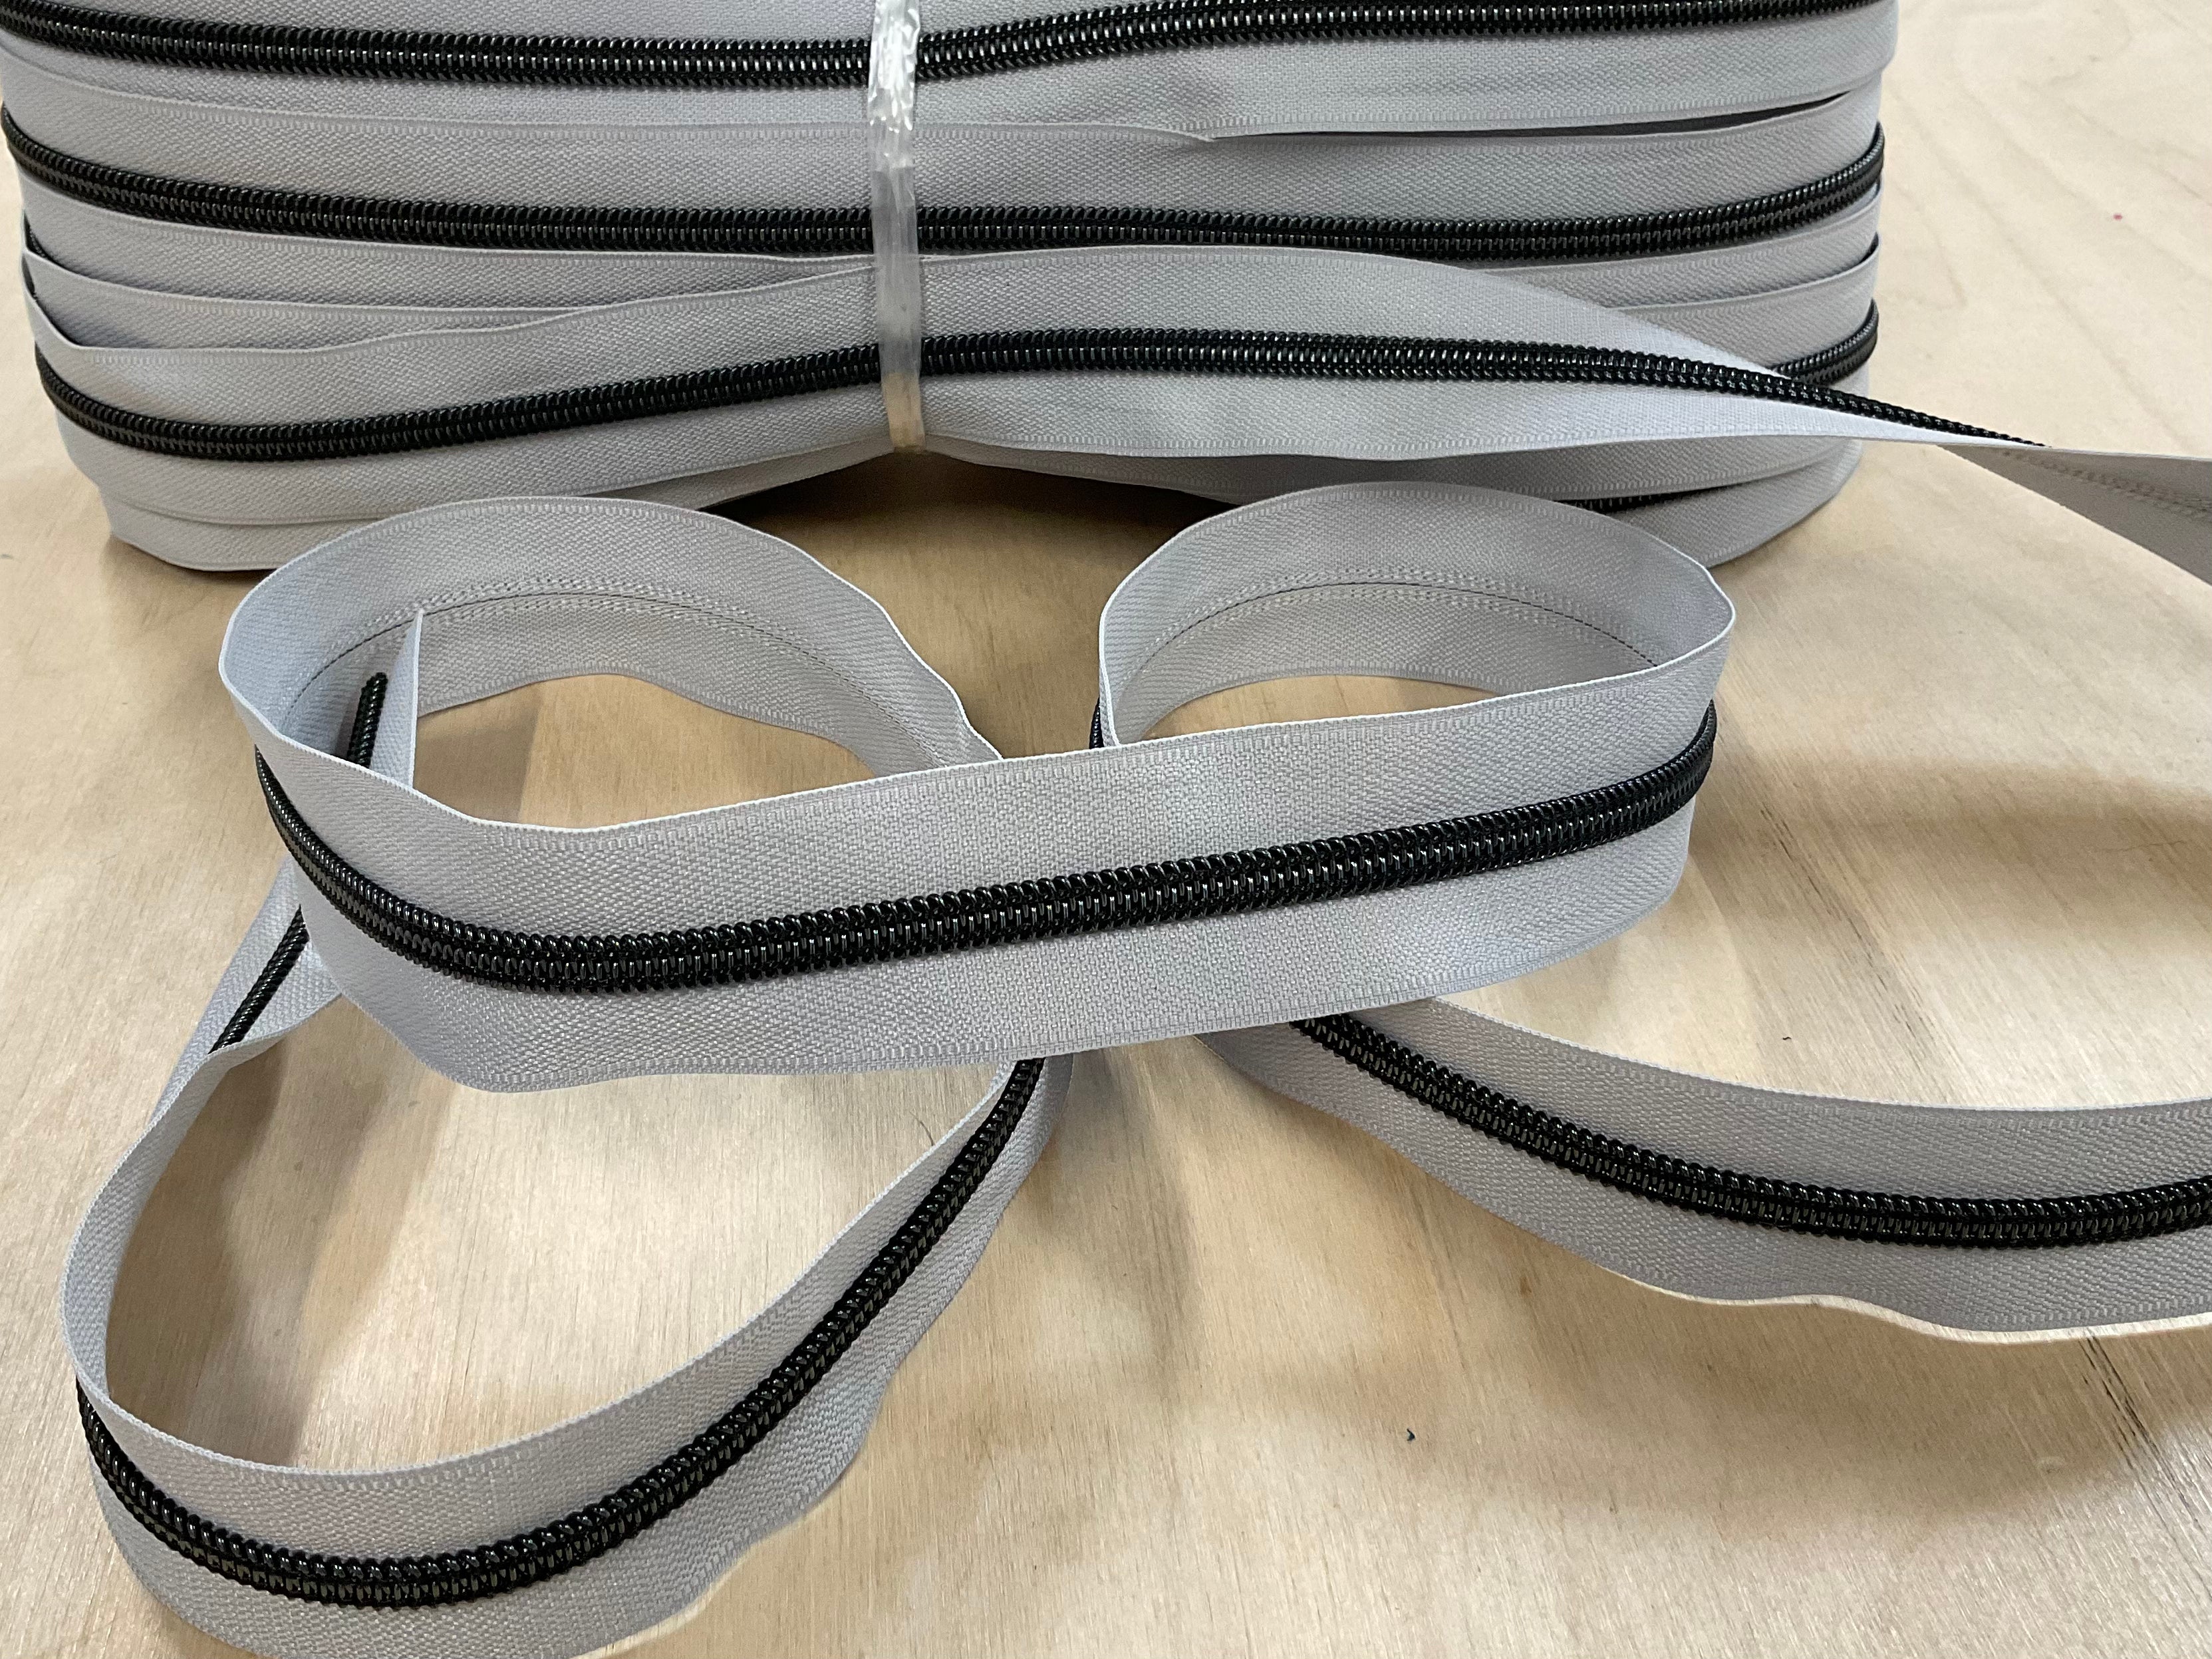 Light Grey with Black Teeth Continuous Zipper Tape